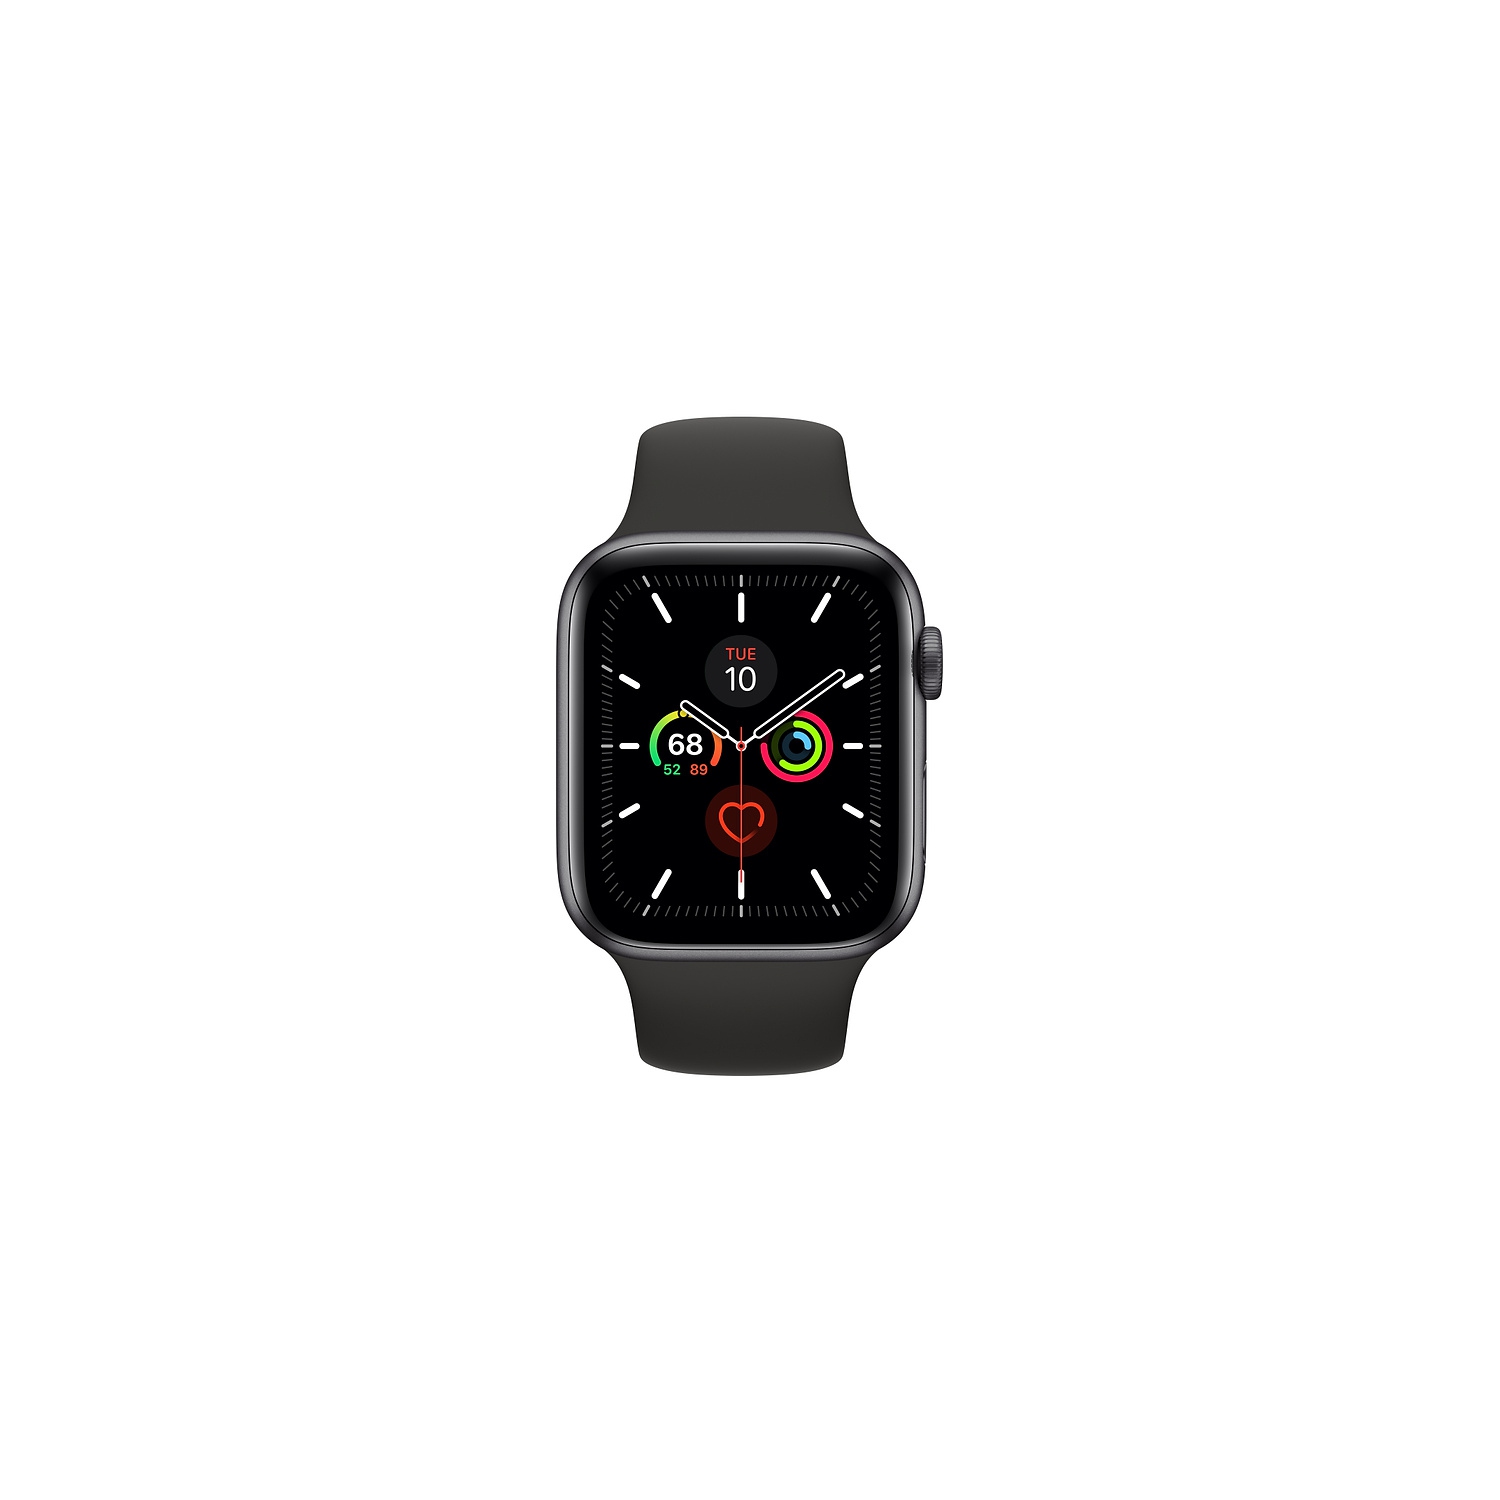 Refurbished (Good) - Apple Watch Series 5 (GPS + Cellular) 44mm Space Grey Aluminum with Black Sport Band